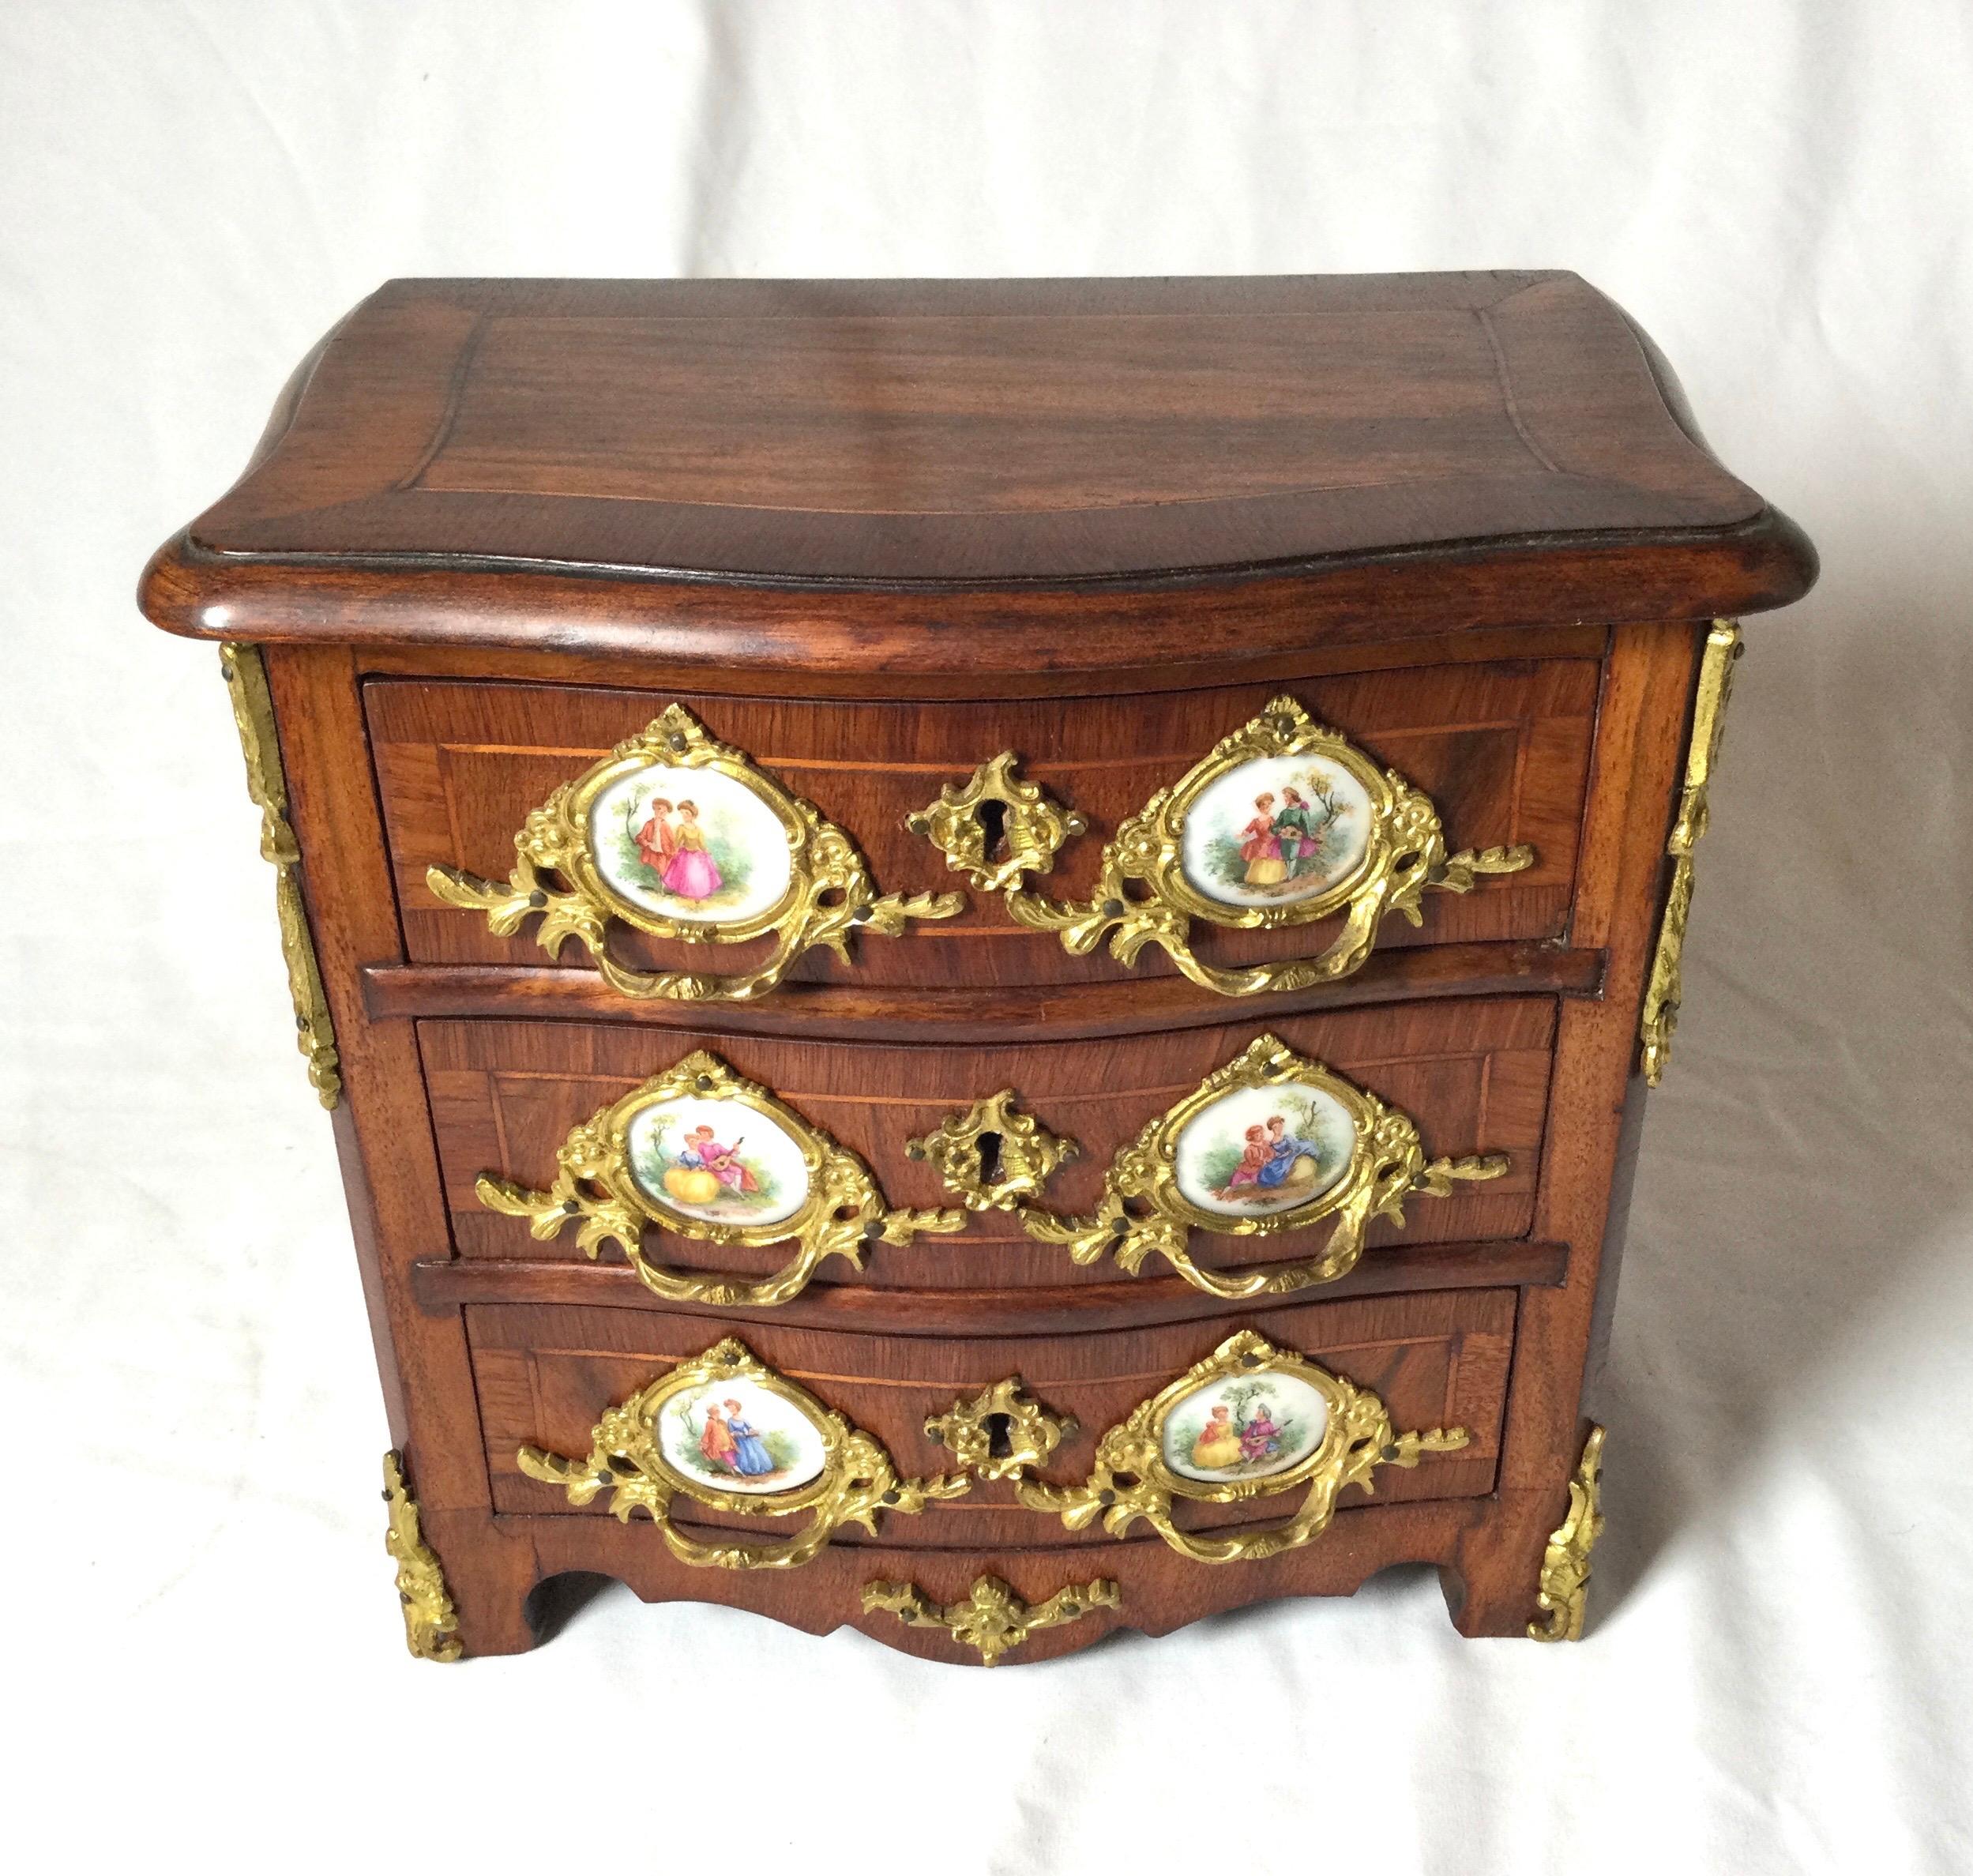 Exquisitely hand crafted late 19th early 20th century antique French jewelry chest. Wood serpentine sides inlay three drawer with porcelain medallions. Key works to open three drawers. Ormolu handles, nice dovetailed drawers. Great size, 10